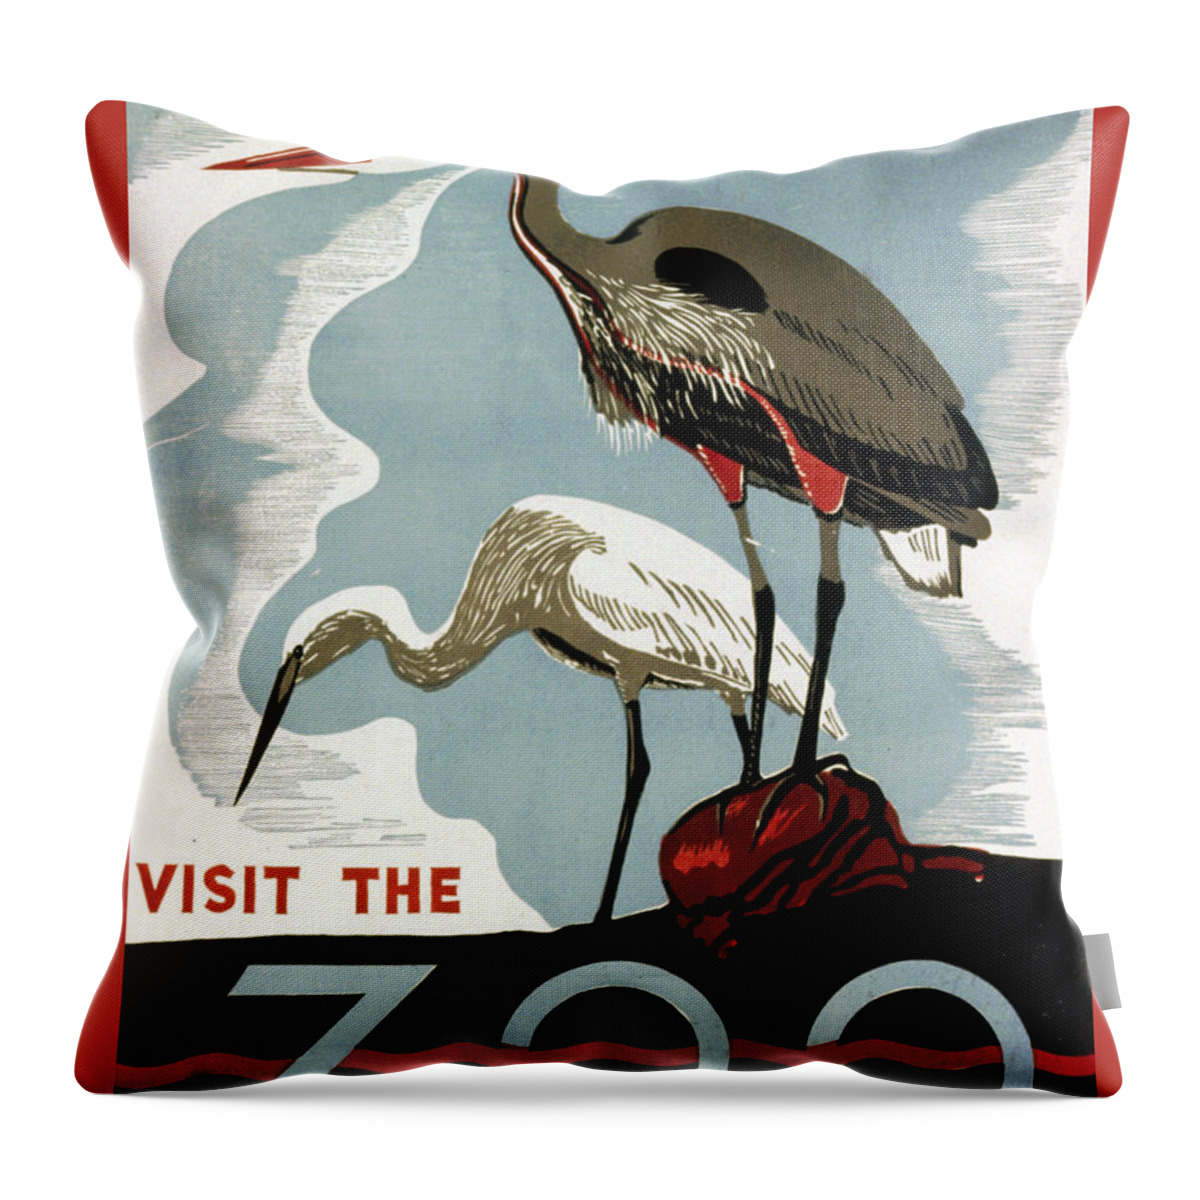 Visit The Zoo Egrets Throw Pillow featuring the digital art Visit The Zoo Egrets by Unknow